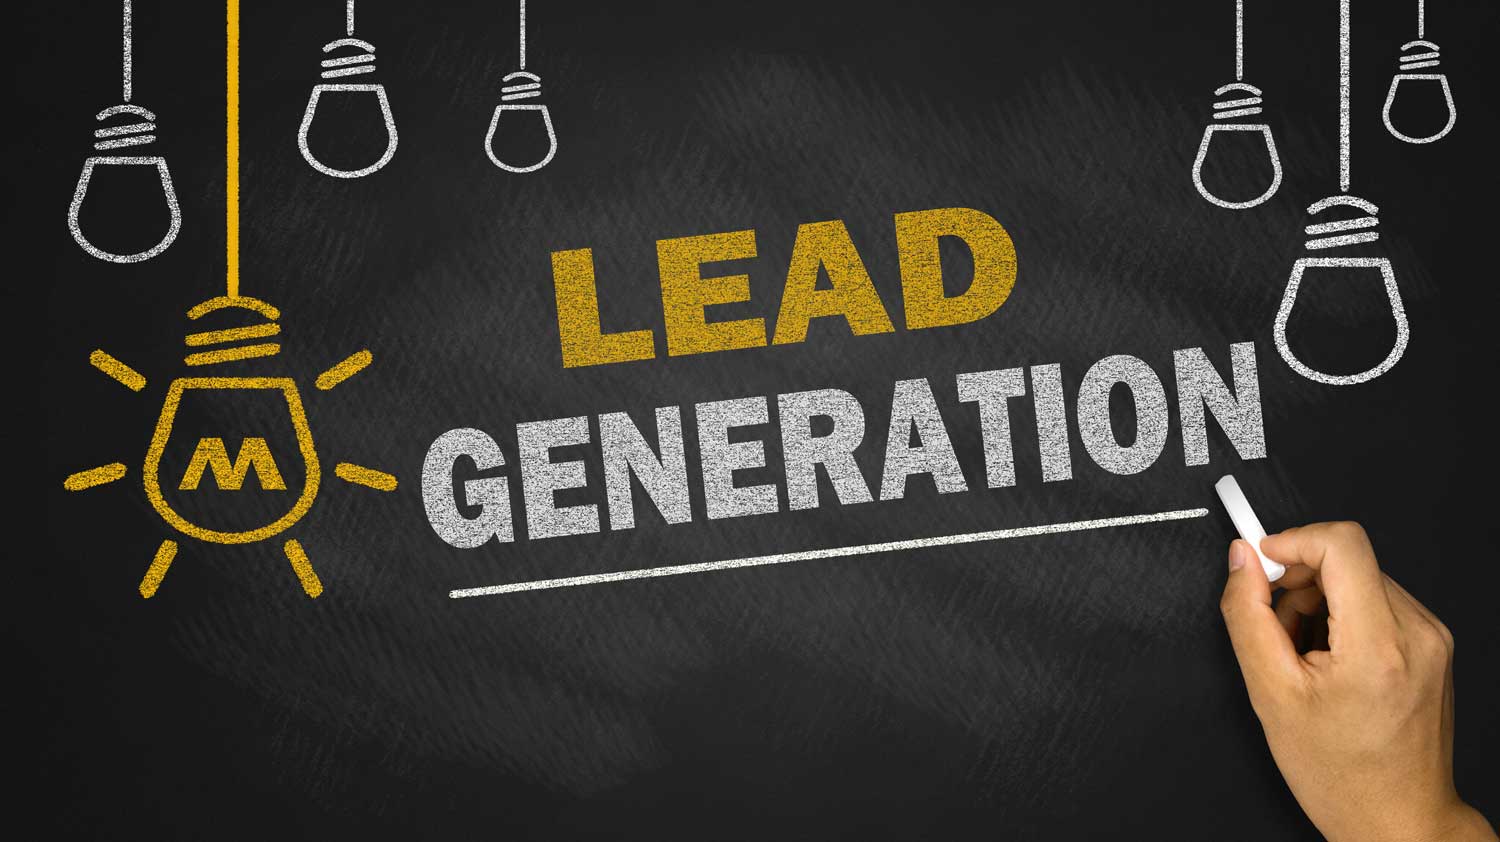 lead generation ideas for your business 2021